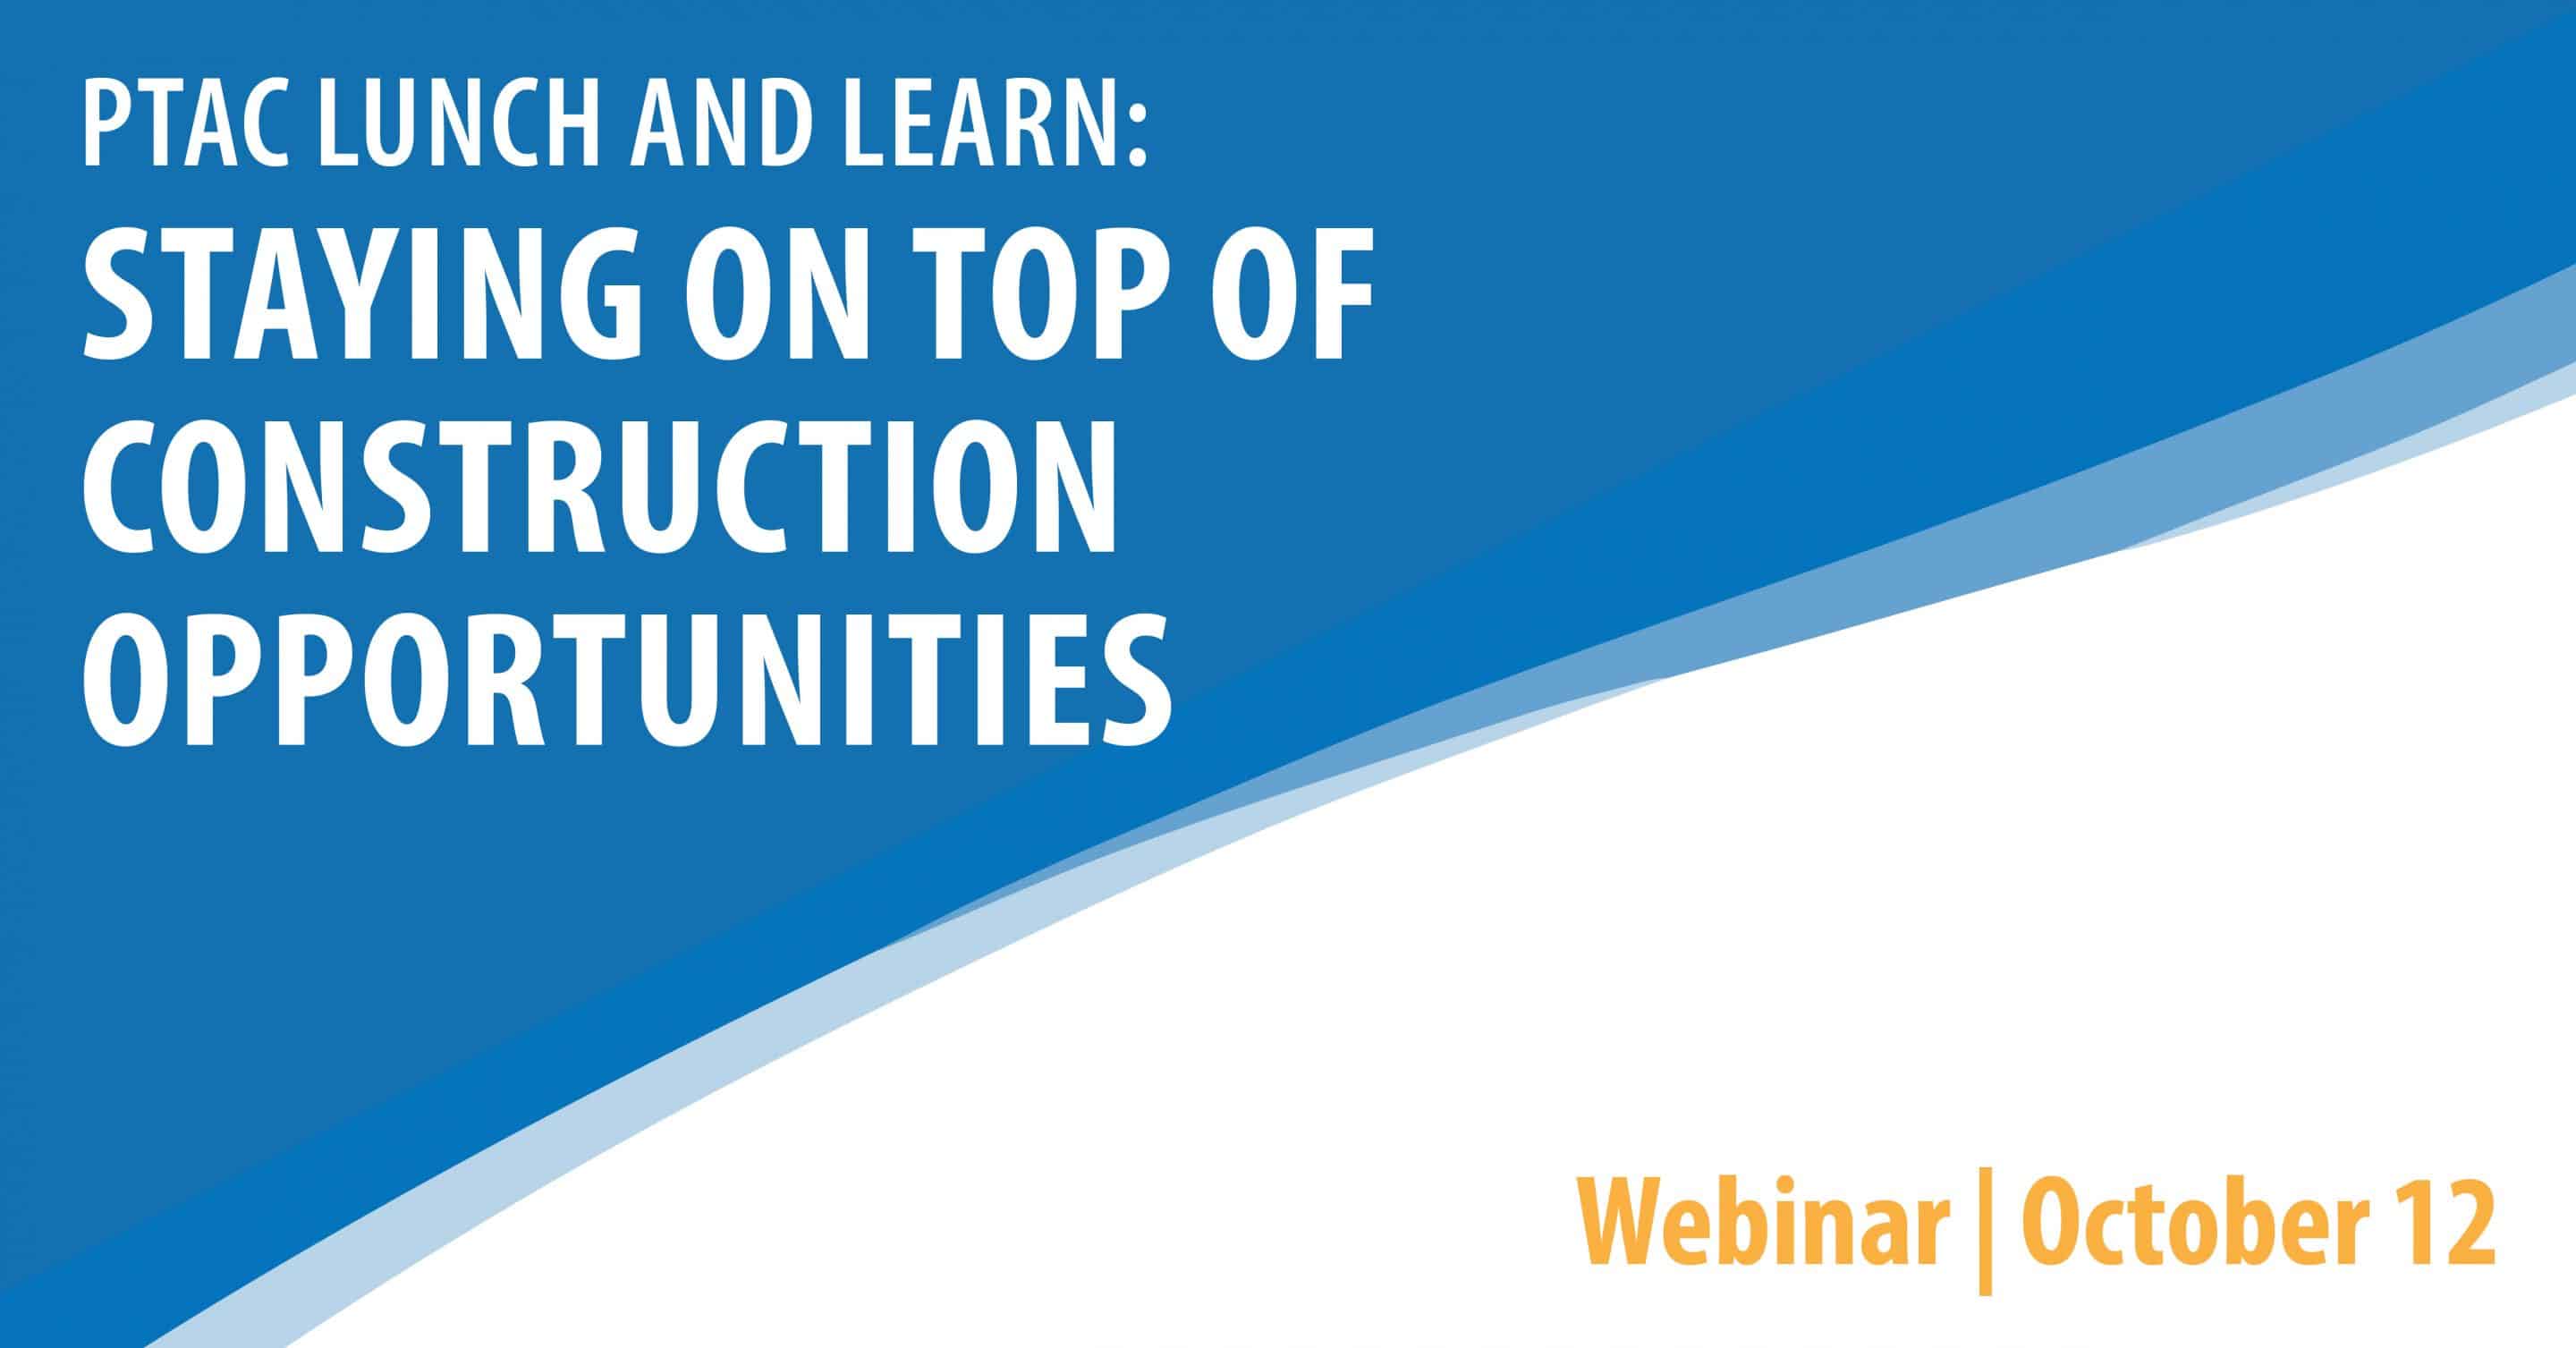 PTAC Lunch and Learn: Staying on top of Construction Opportunities